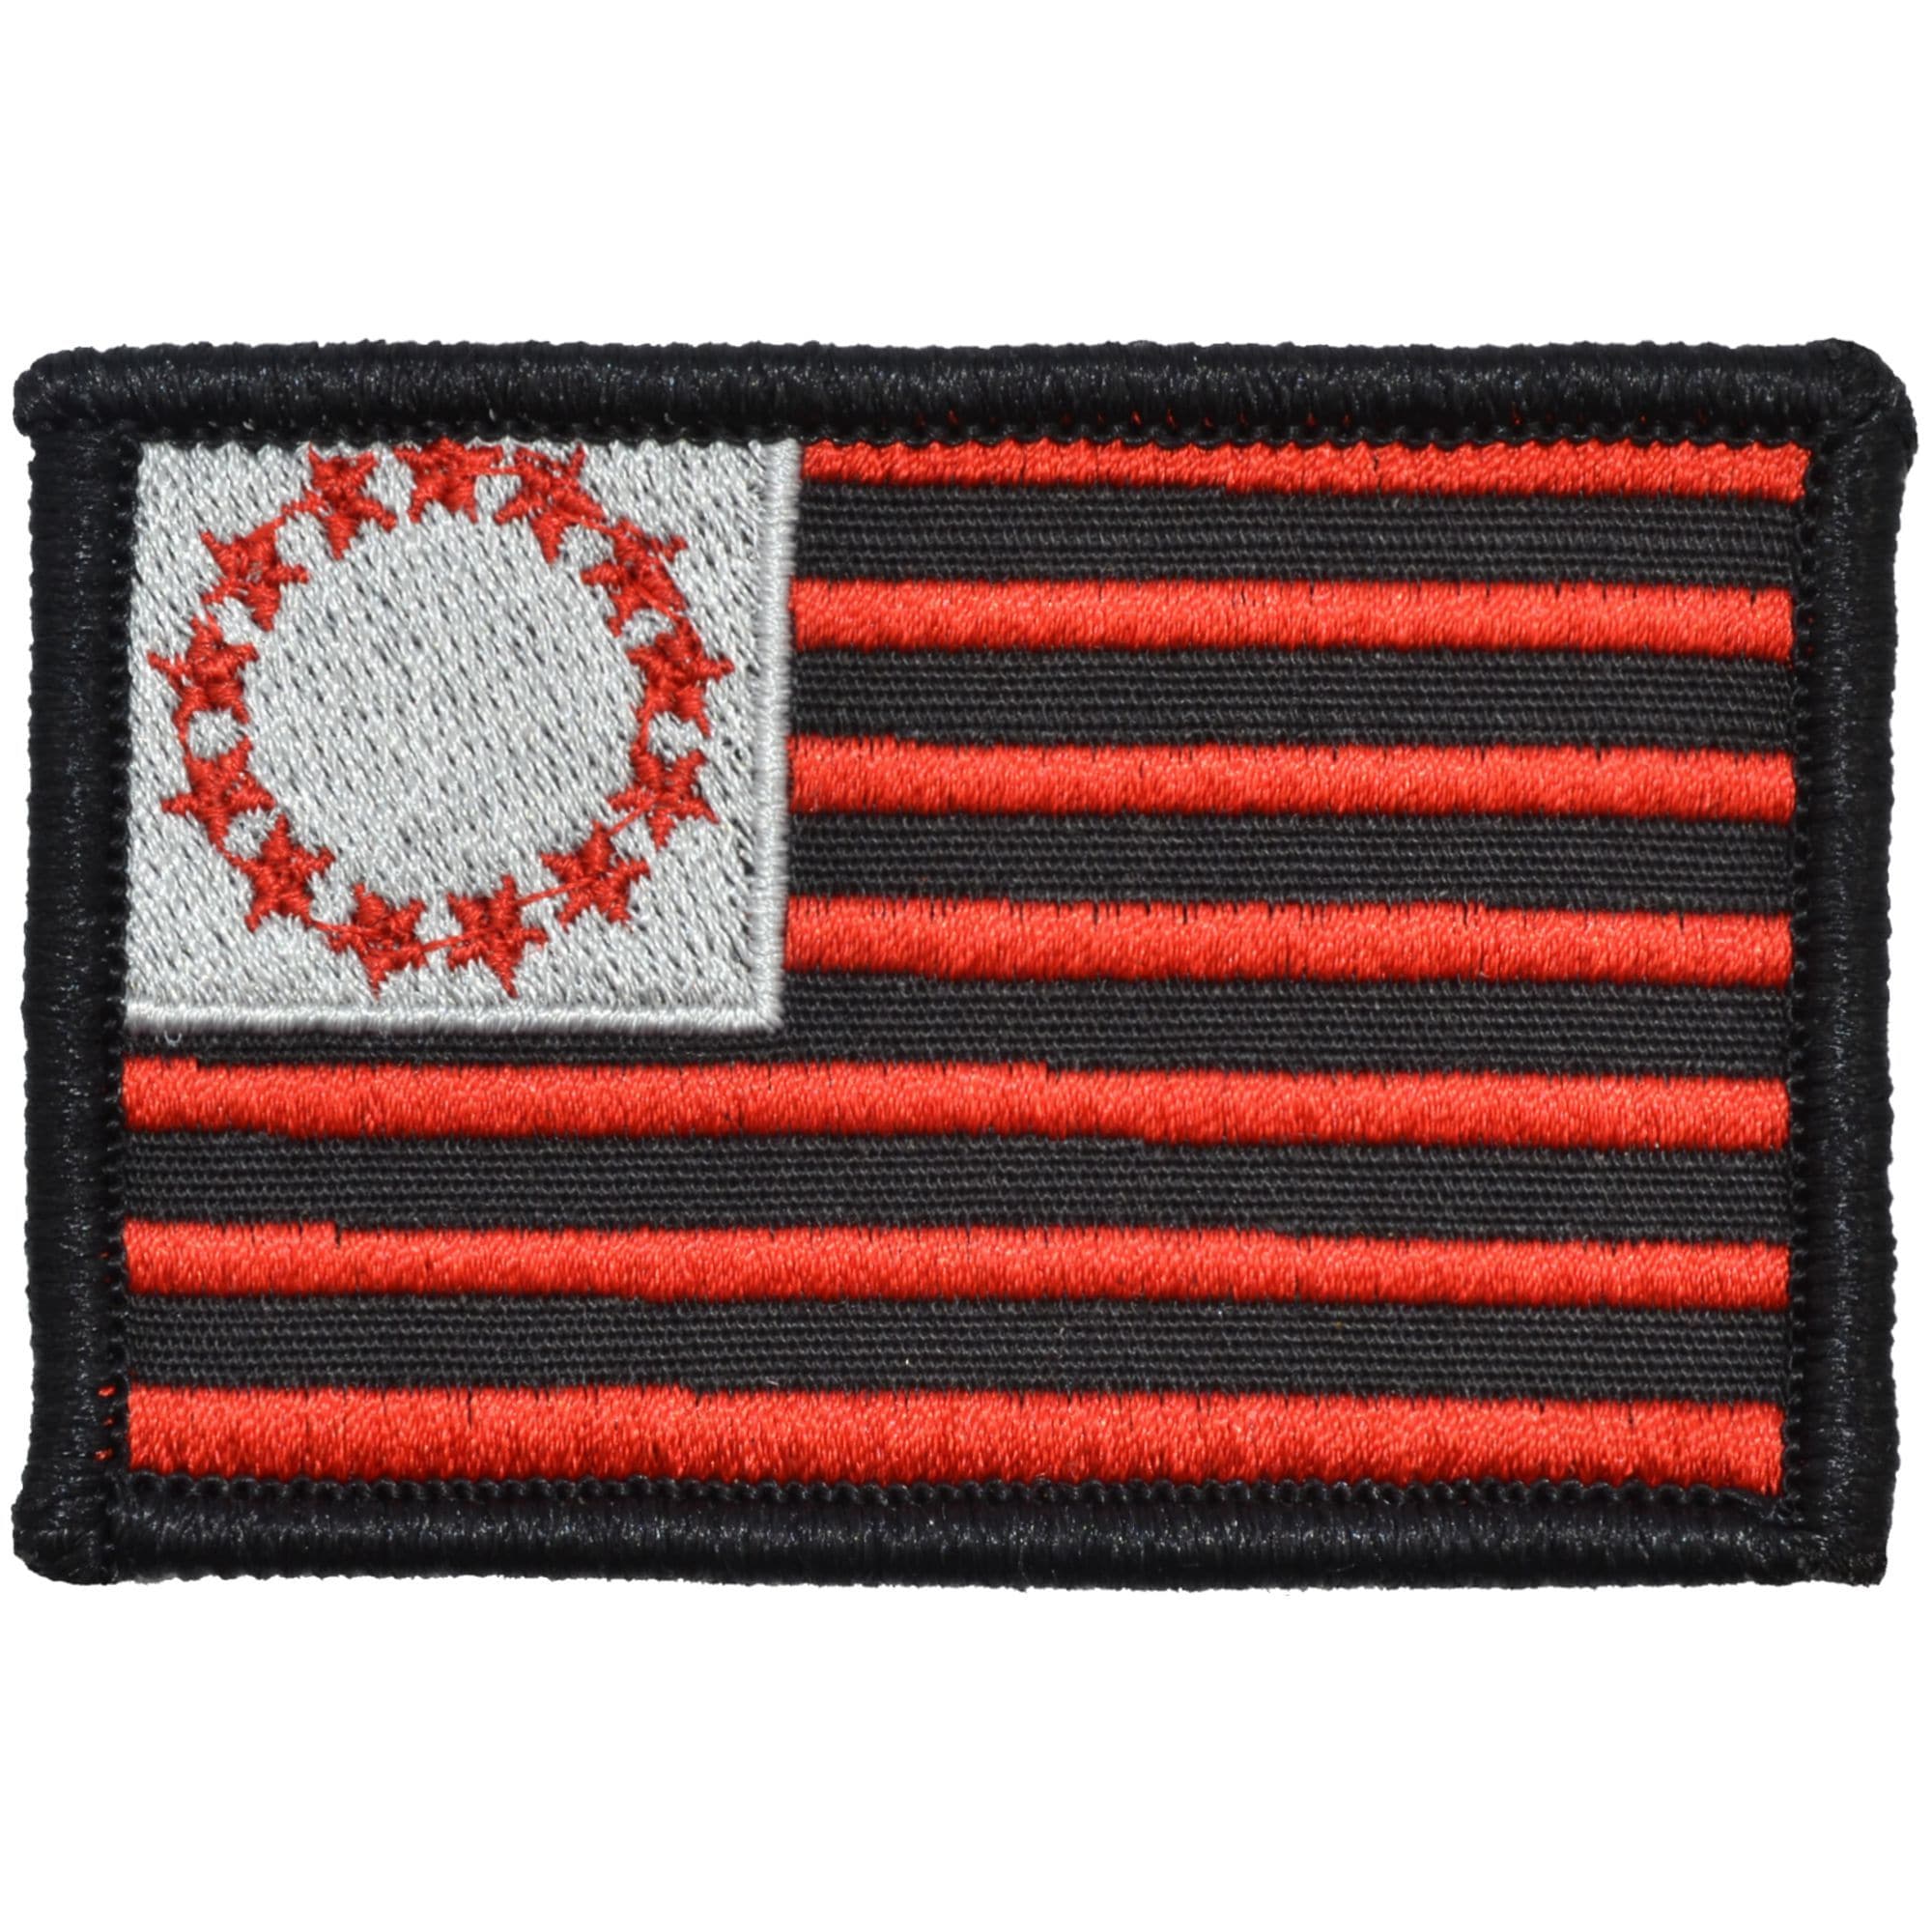 Tactical Gear Junkie Patches Black w/ Red Betsy Ross Flag - 2x3 Patch